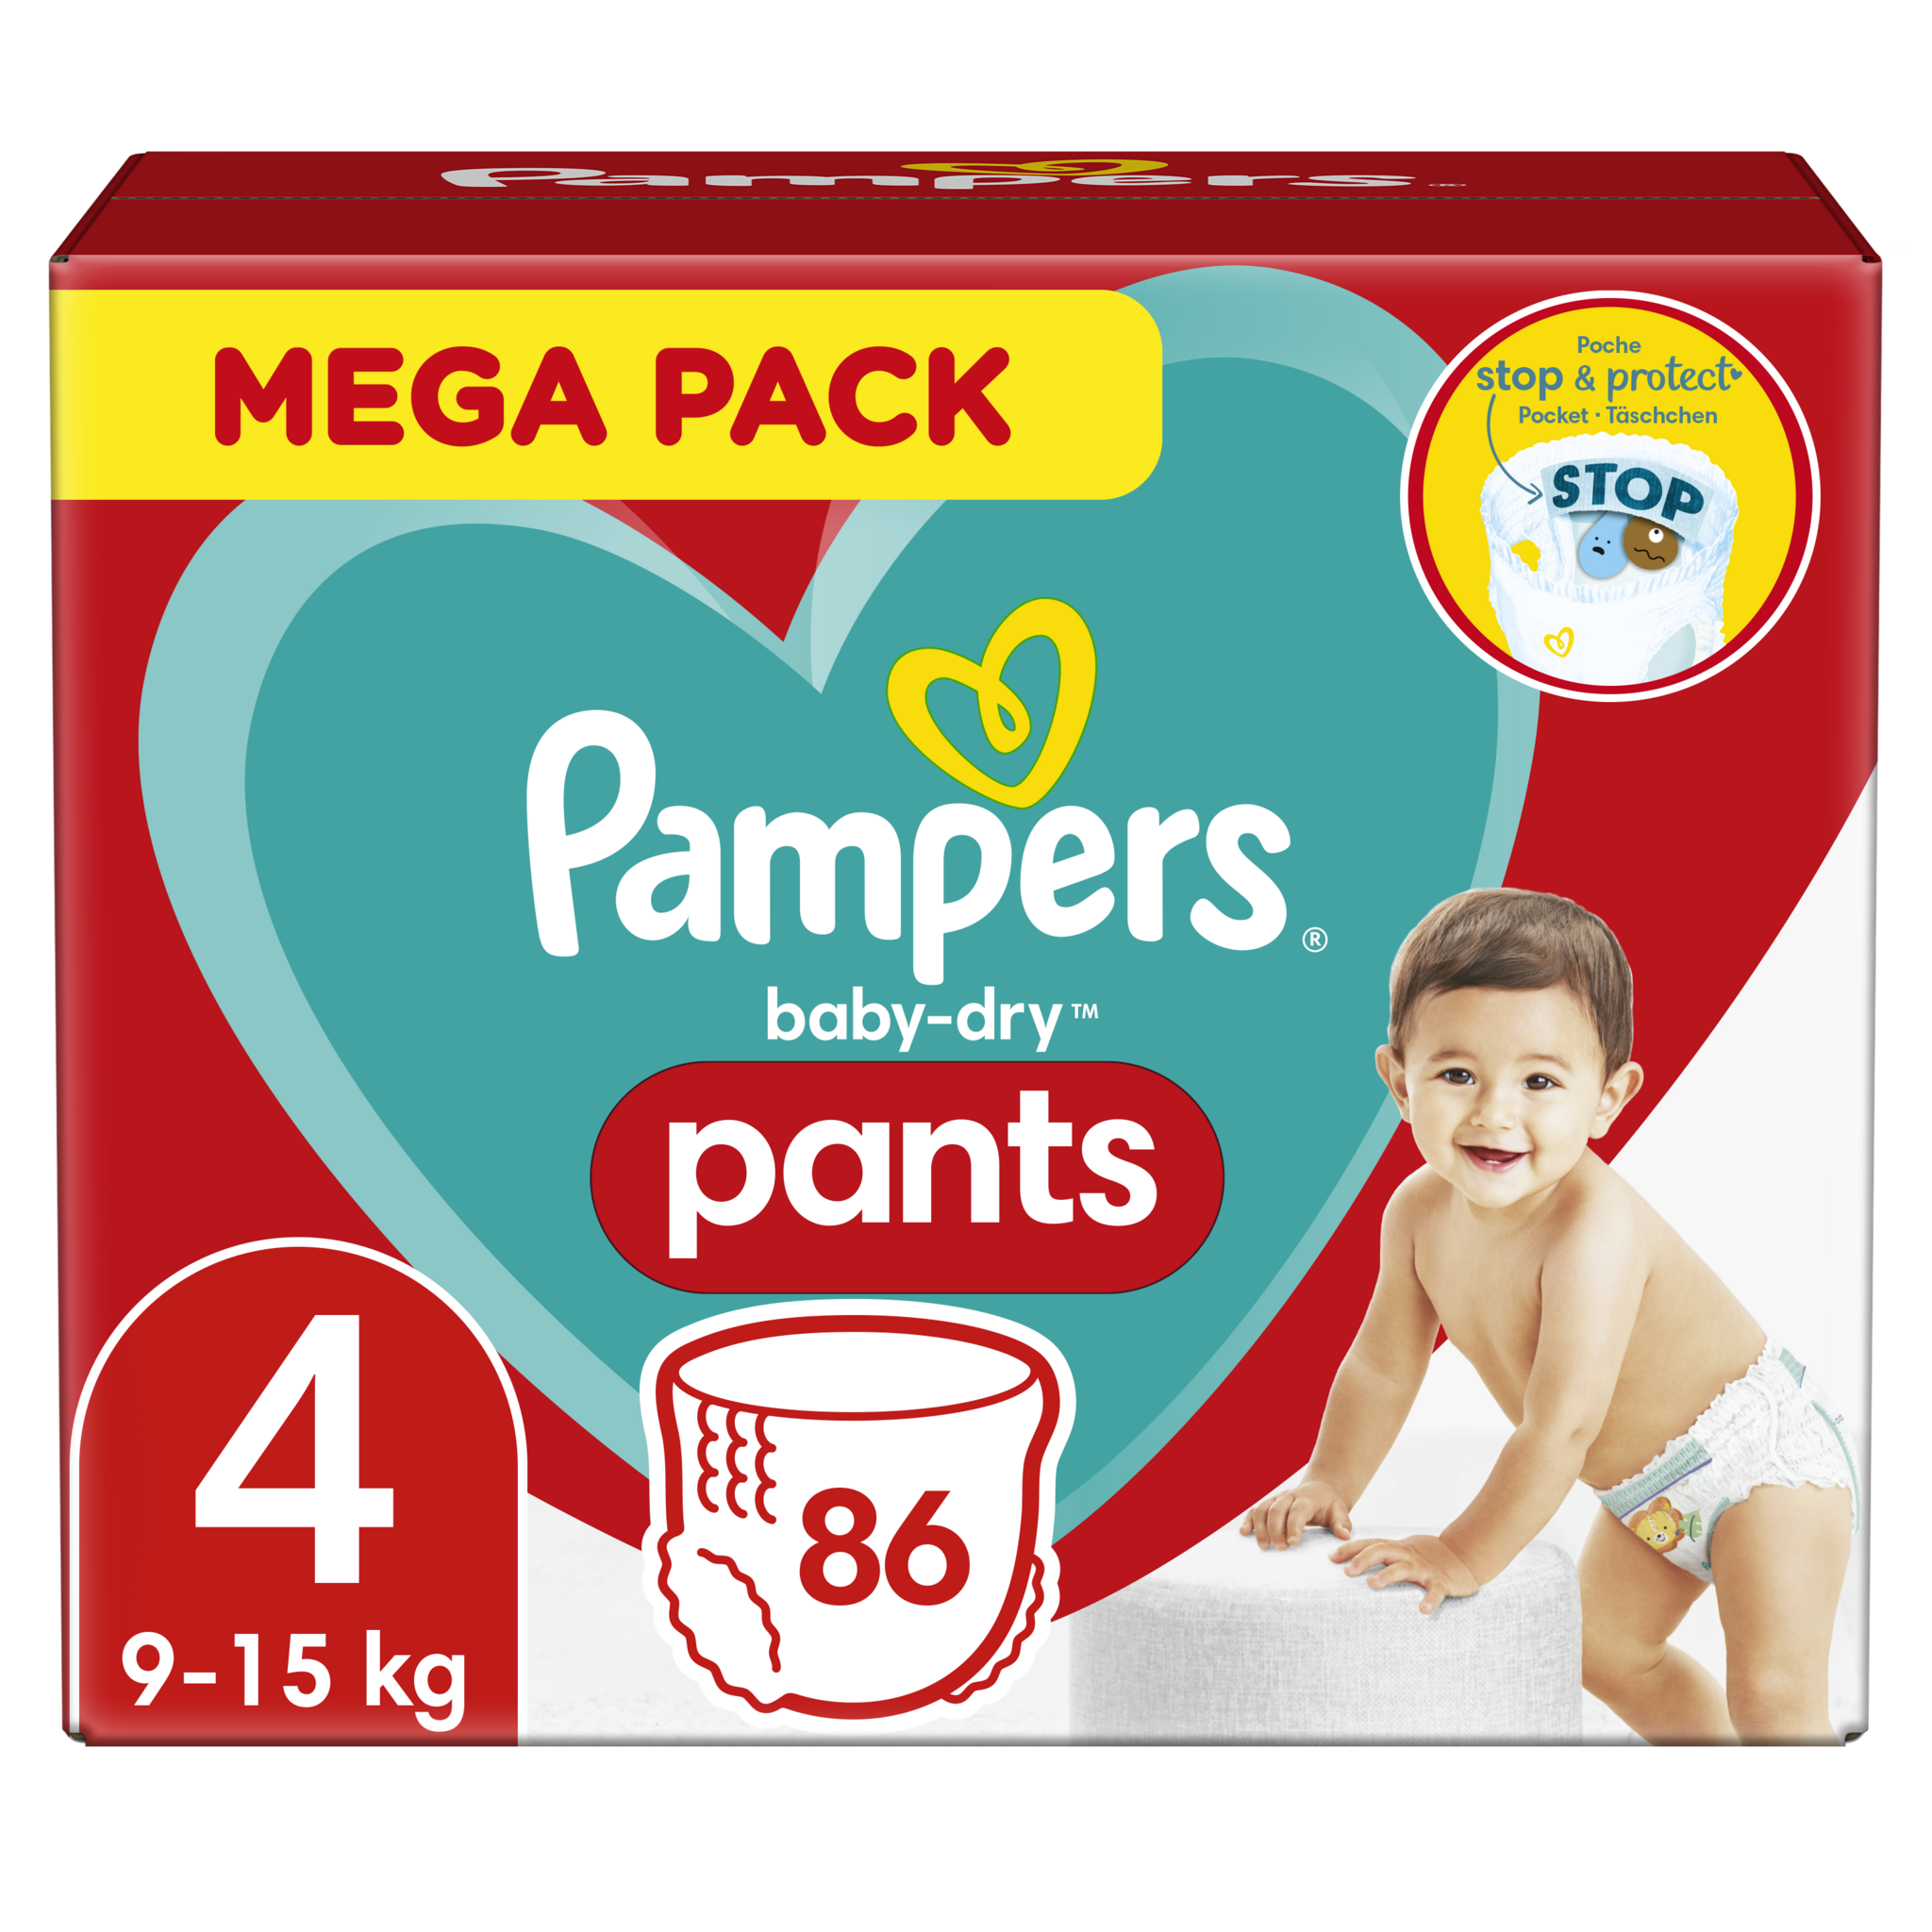 PAMPERS Pants baby-dry couche culotte taille 4 ( 9-15kg ) 86